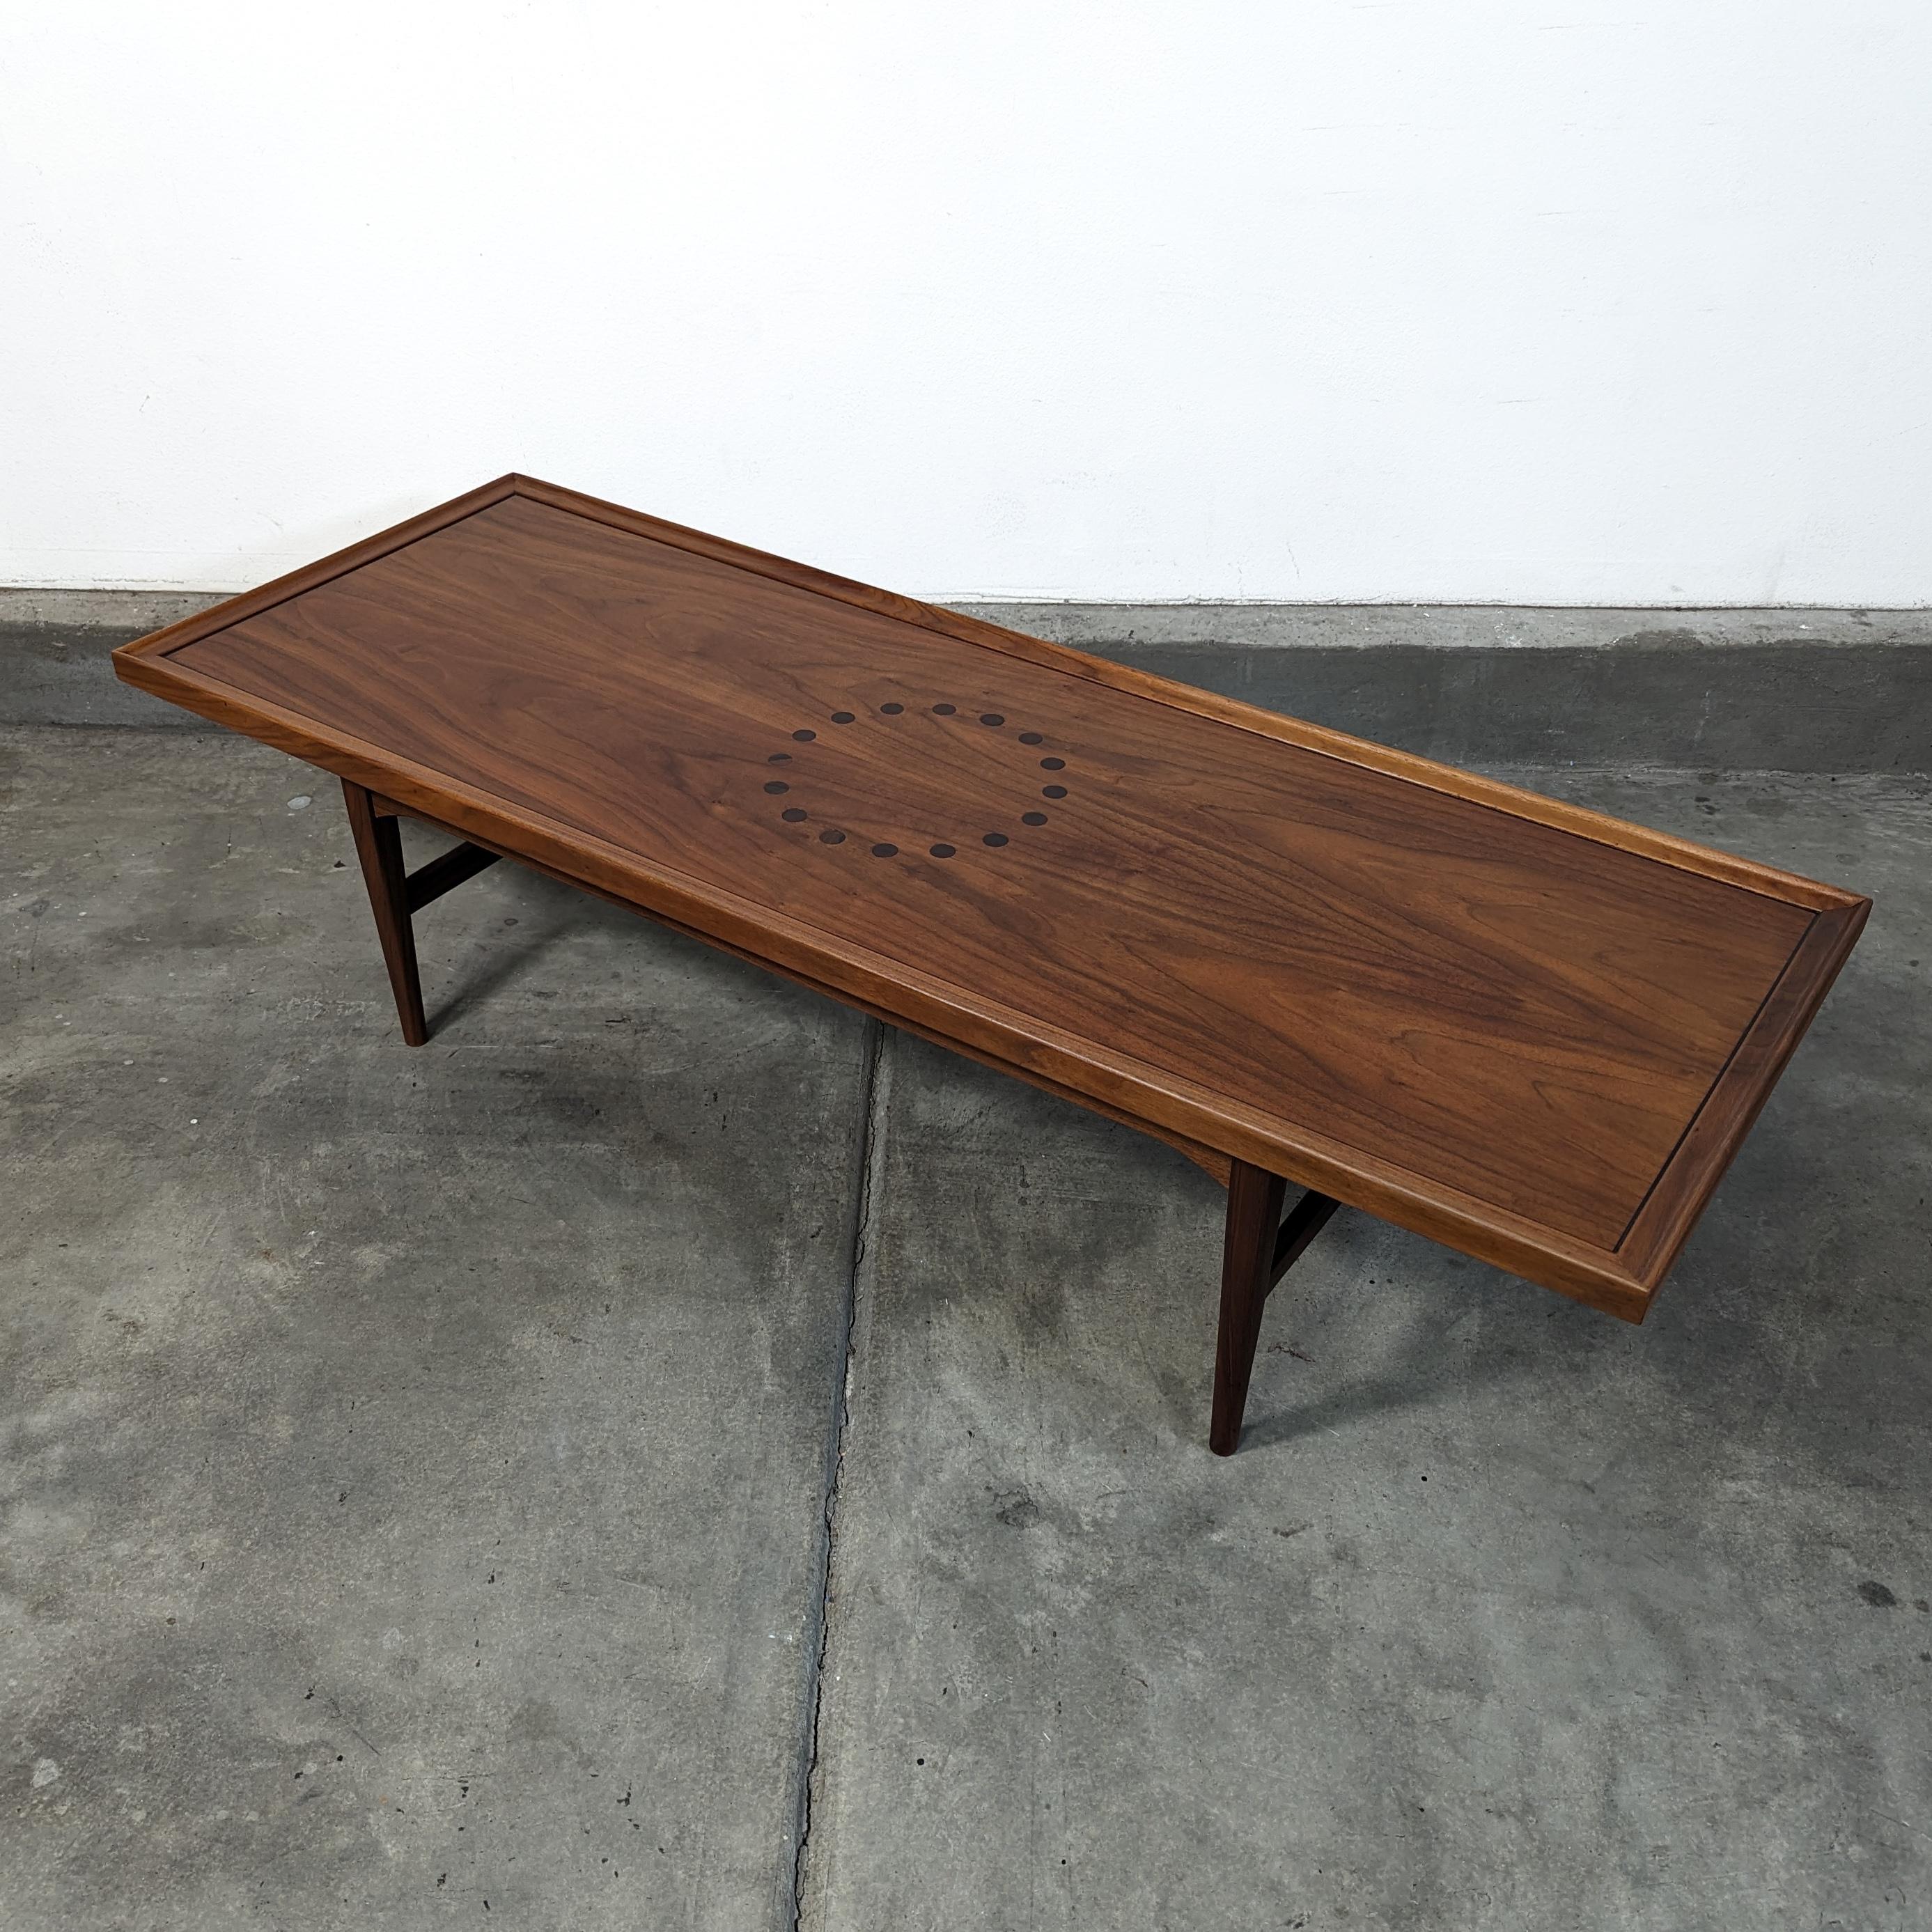 Mid Century Modern Coffee Table By Drexel, Declaration Line, c1960s For Sale 6